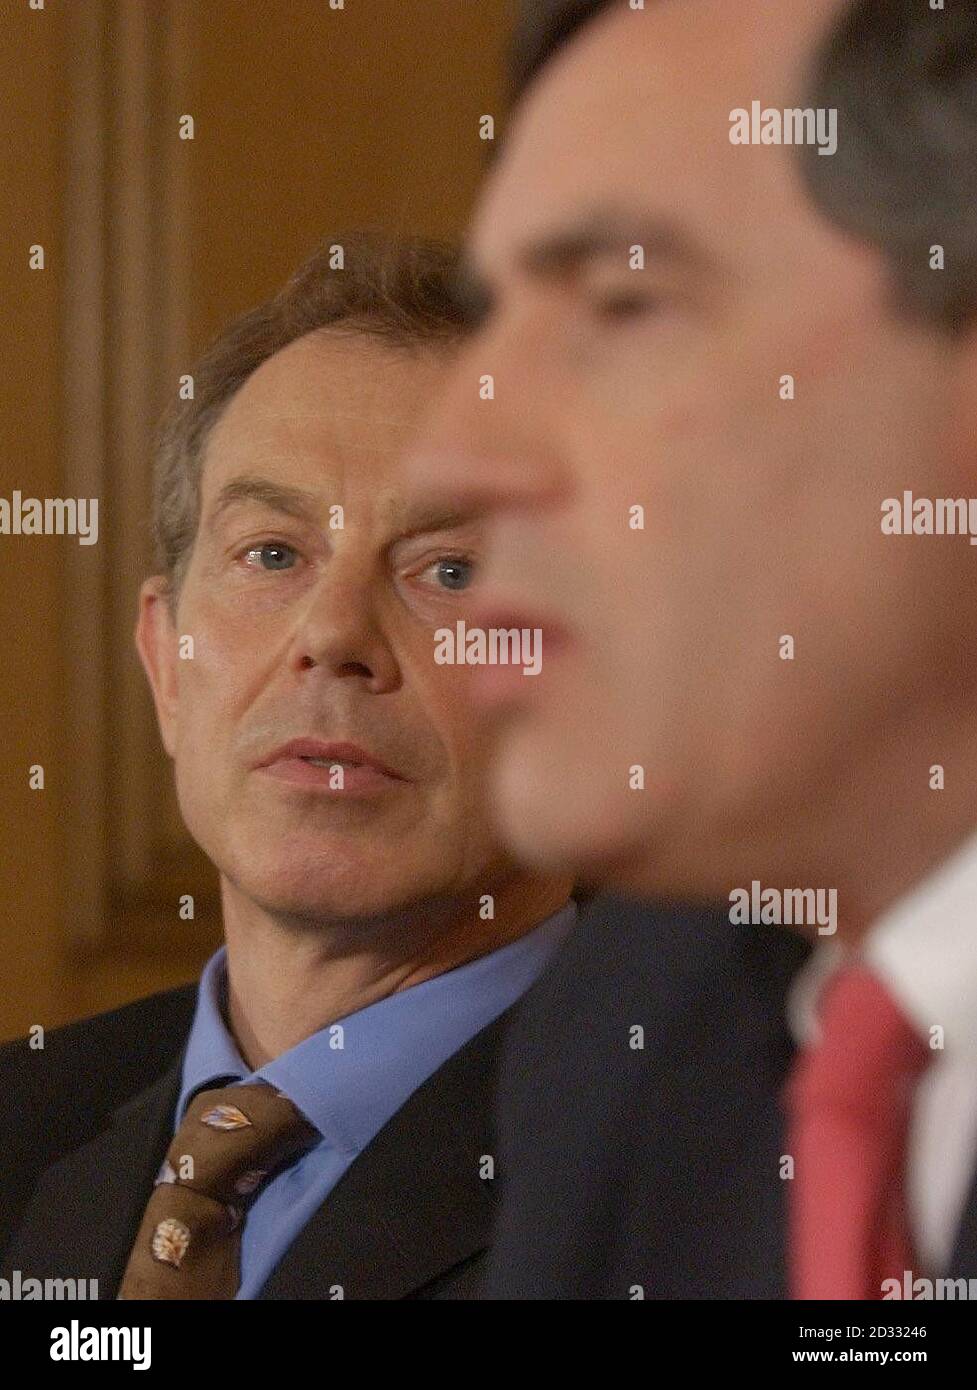 Britain's Prime Minister Tony Blair and Chancellor of the Exchequer Gordon Brown, right, during a joint press conference at 10 Downing Street in London, following their decision to delay Britain's entry into the European single currency. Stock Photo